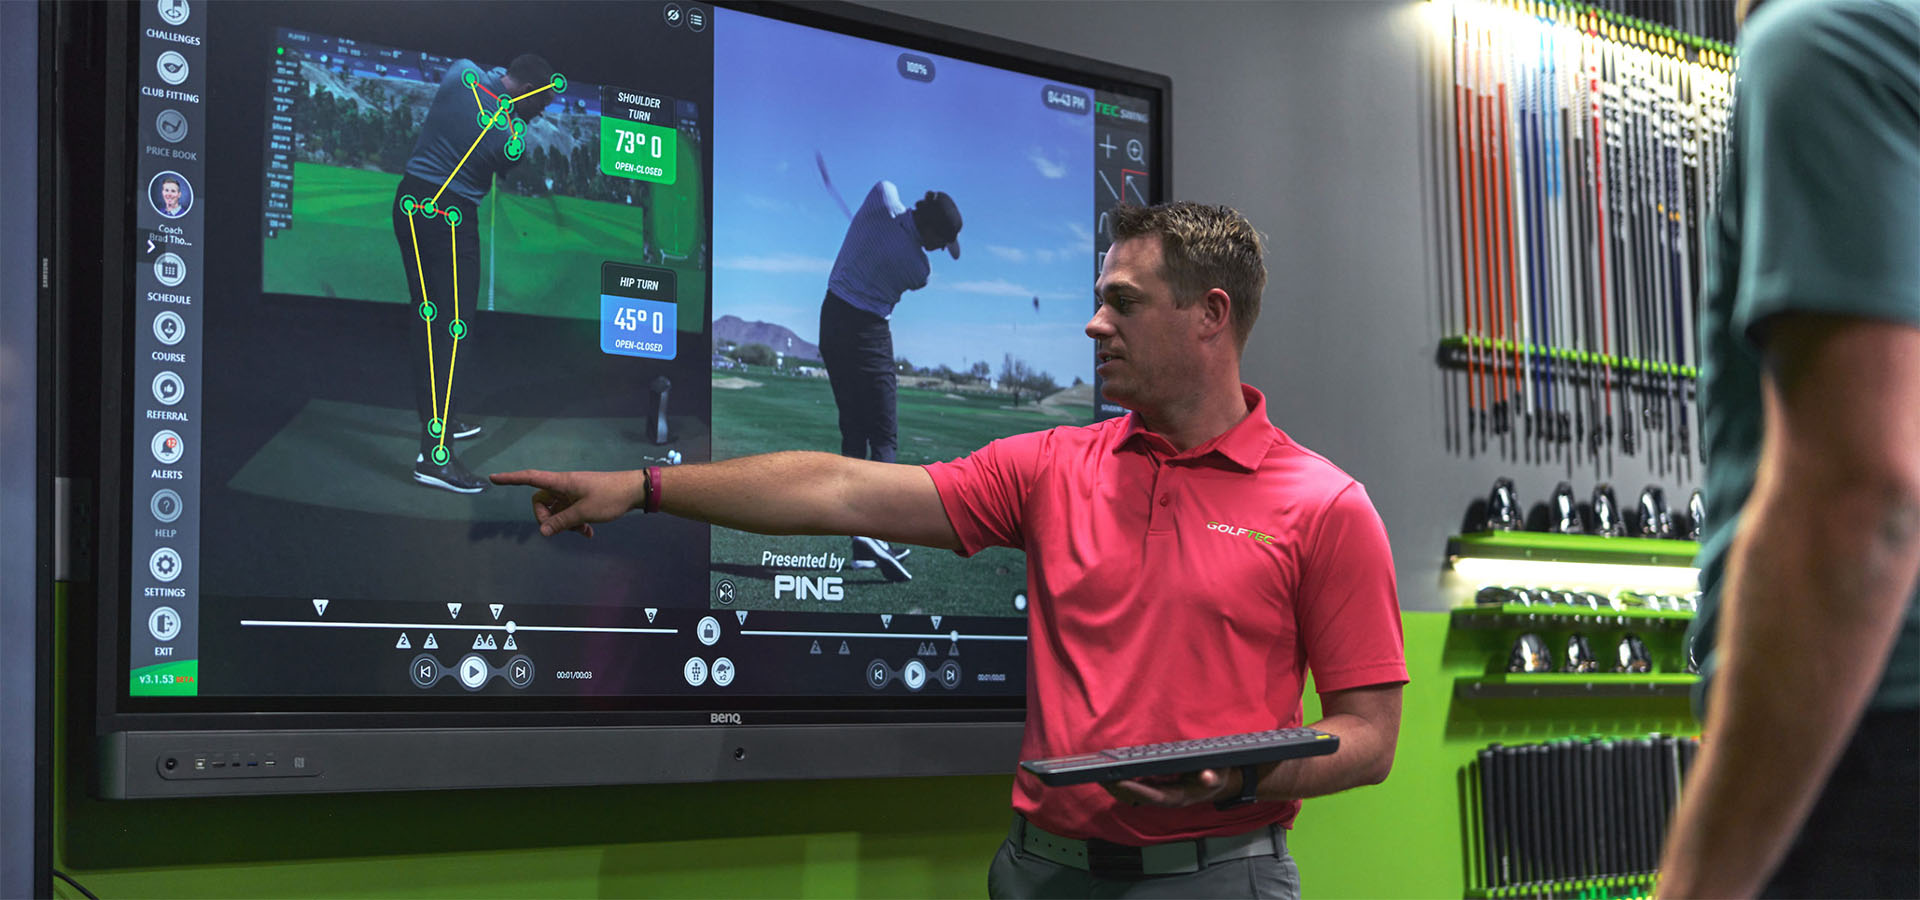 golf instructor showing something on screen to student